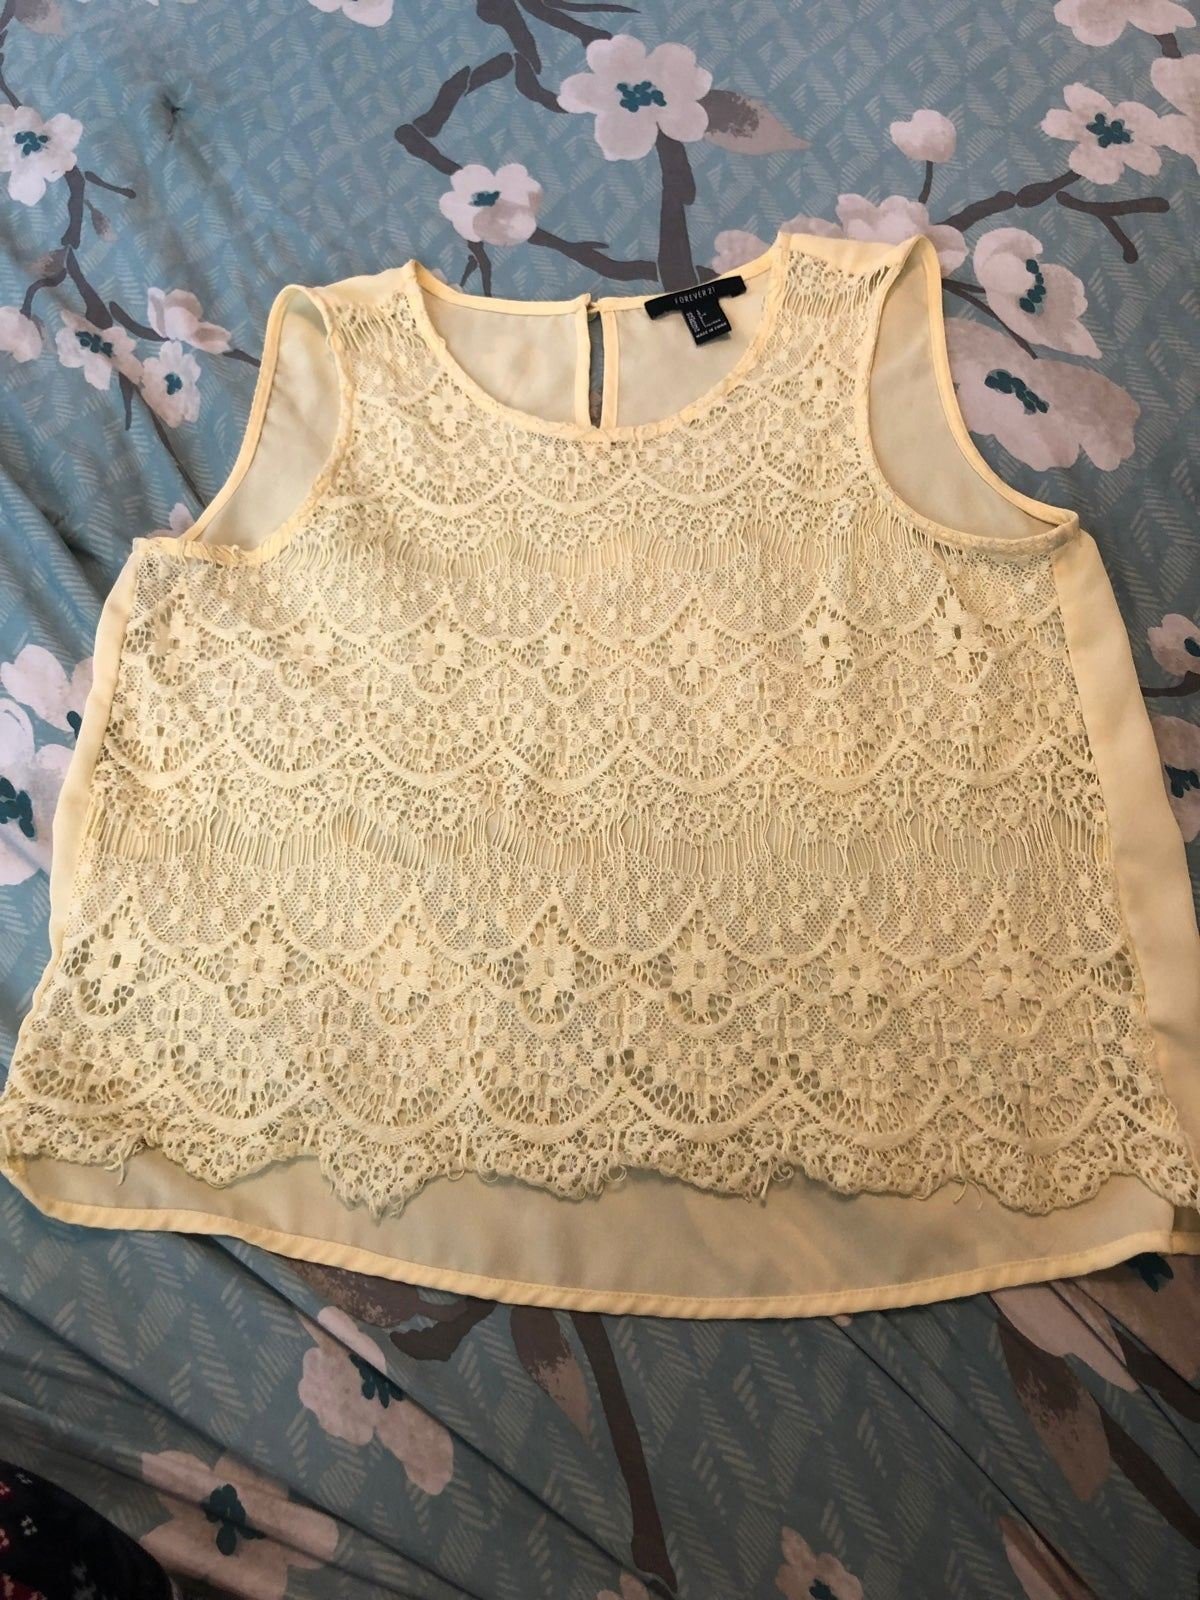 The Best Seller Forever 21 large yellow top FzQgVf5tj Z